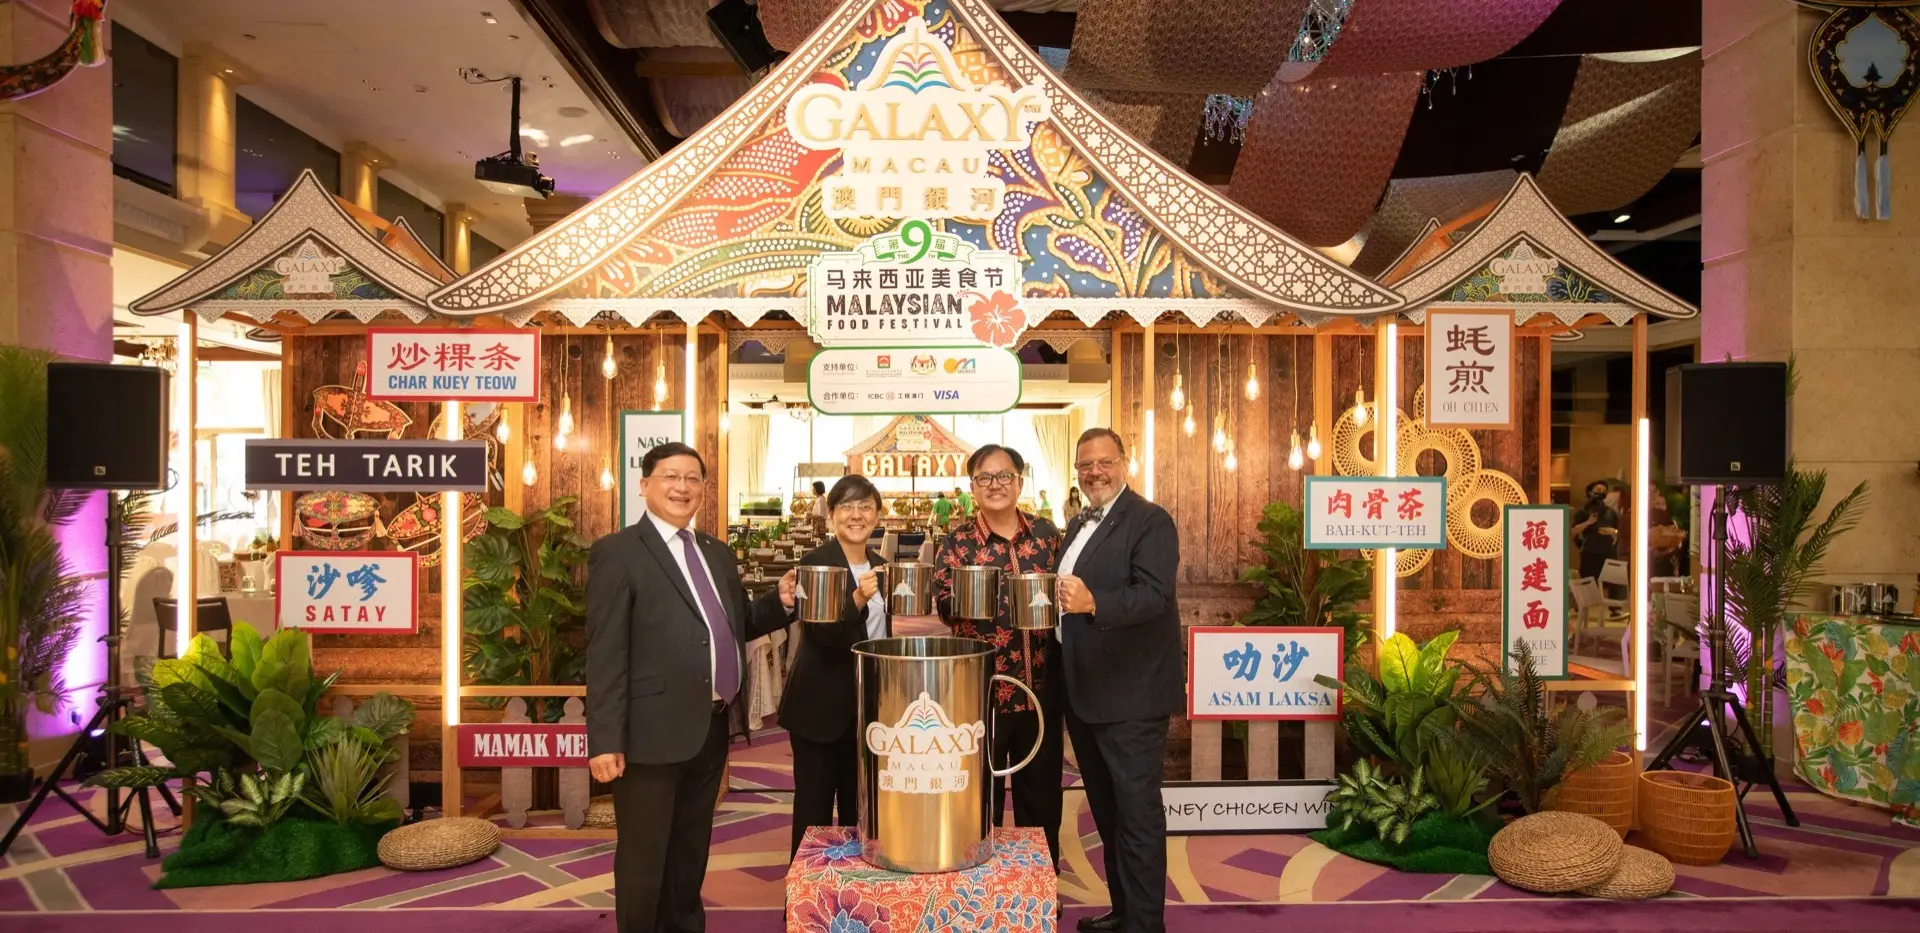 Galaxy Macau's Malaysian Food Festival Returns With A Grand Opening Ceremony